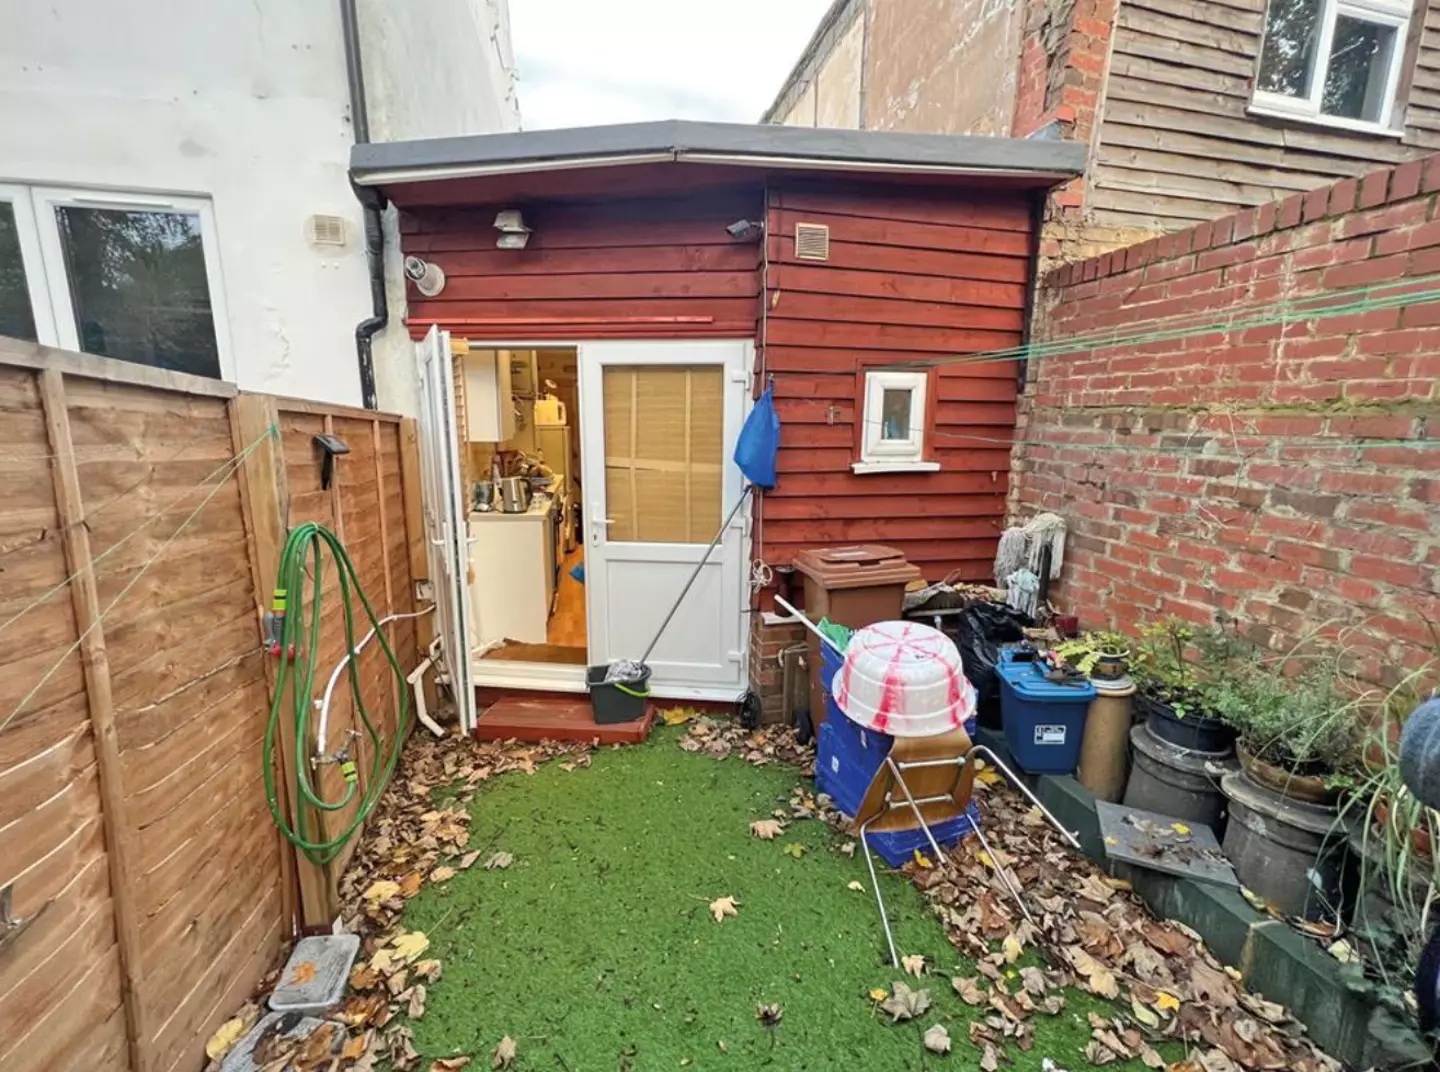 Rightmove has listed a converted garage in Hackney for the measly price of £120,000.